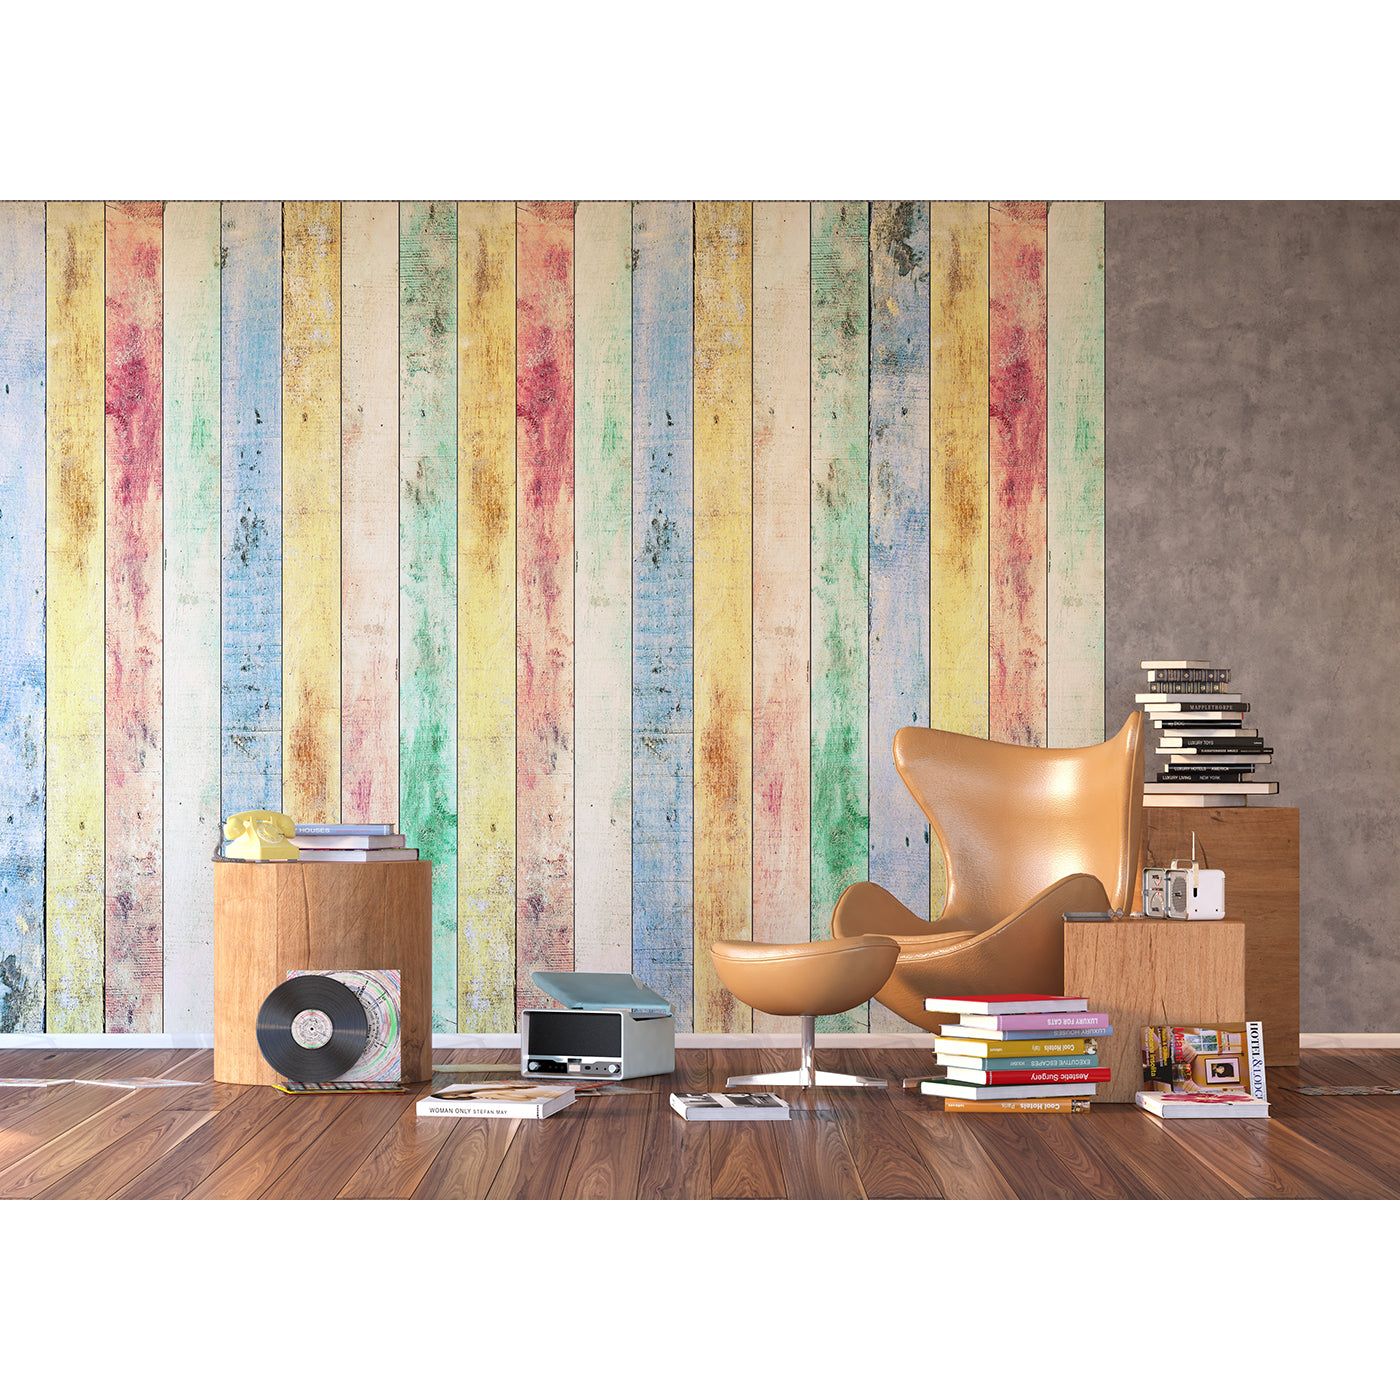 Rustic Rainbow: Distressed Wooden Planks Wall Mural